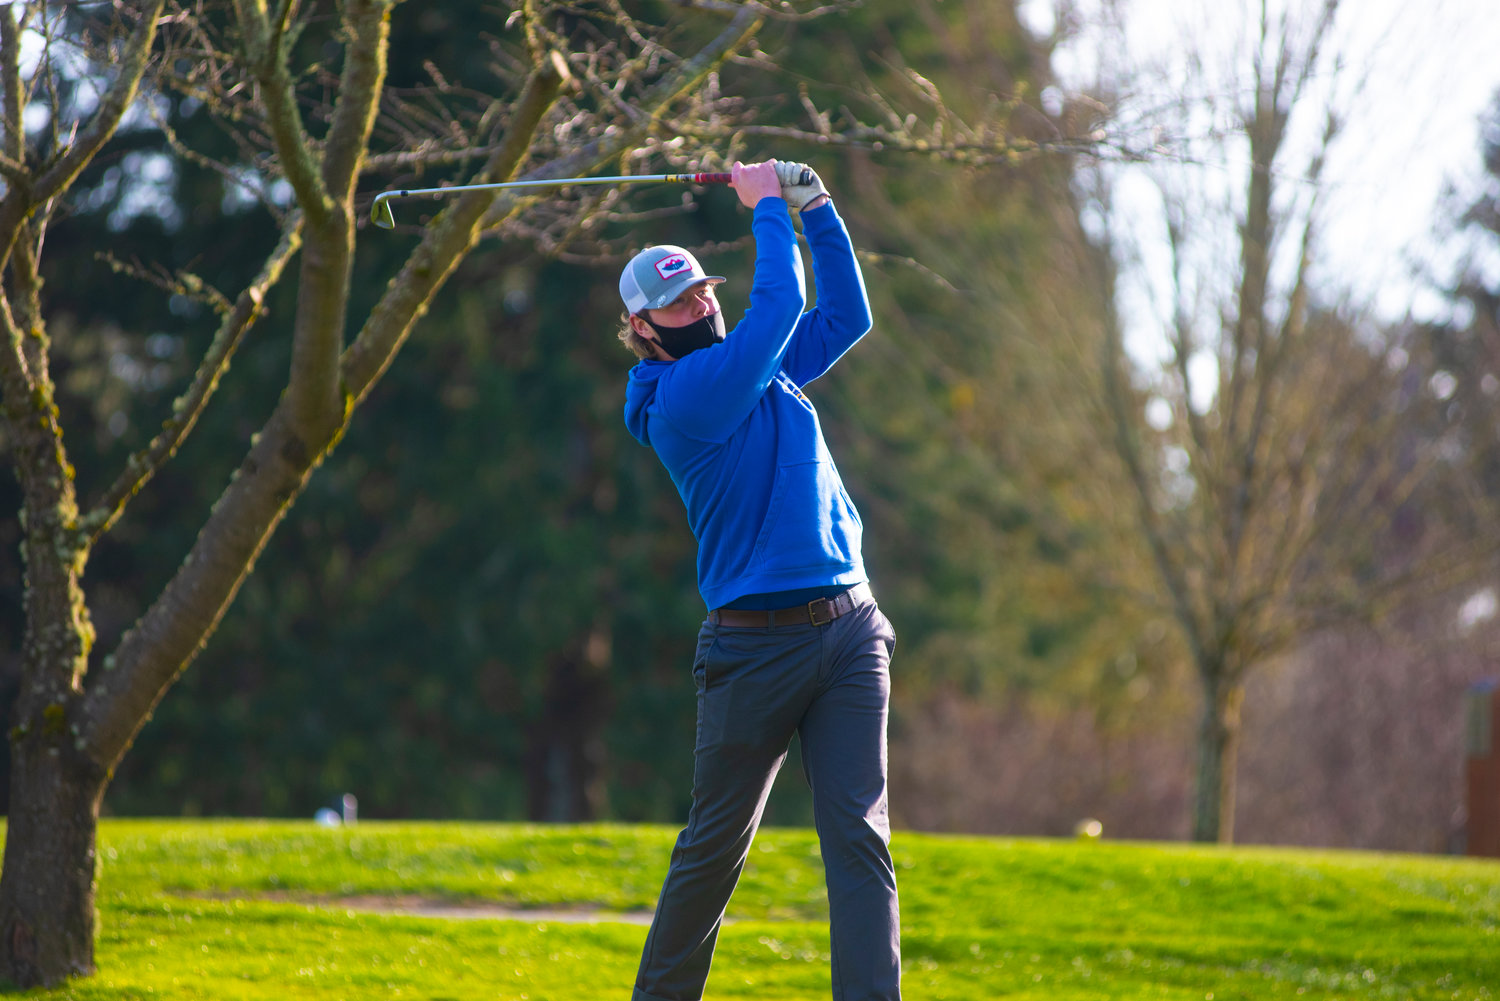 Rochester's Johnny Childers swings in a match against Tumwater on Wednesday.